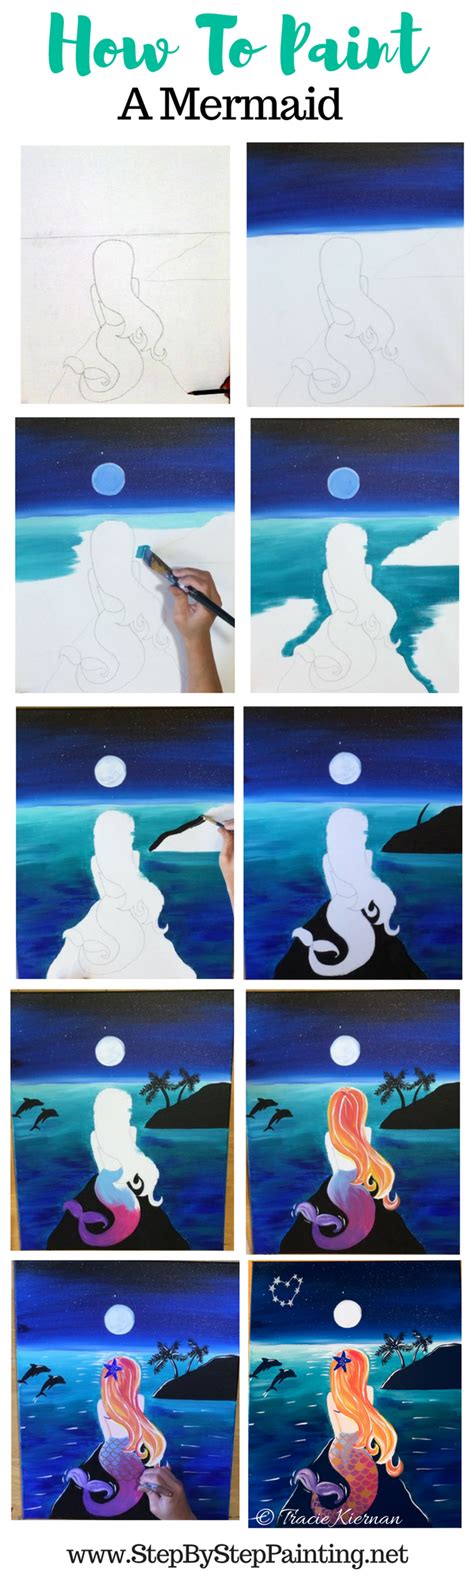 How To Paint A Mermaid Step By Step Painting Tutorial